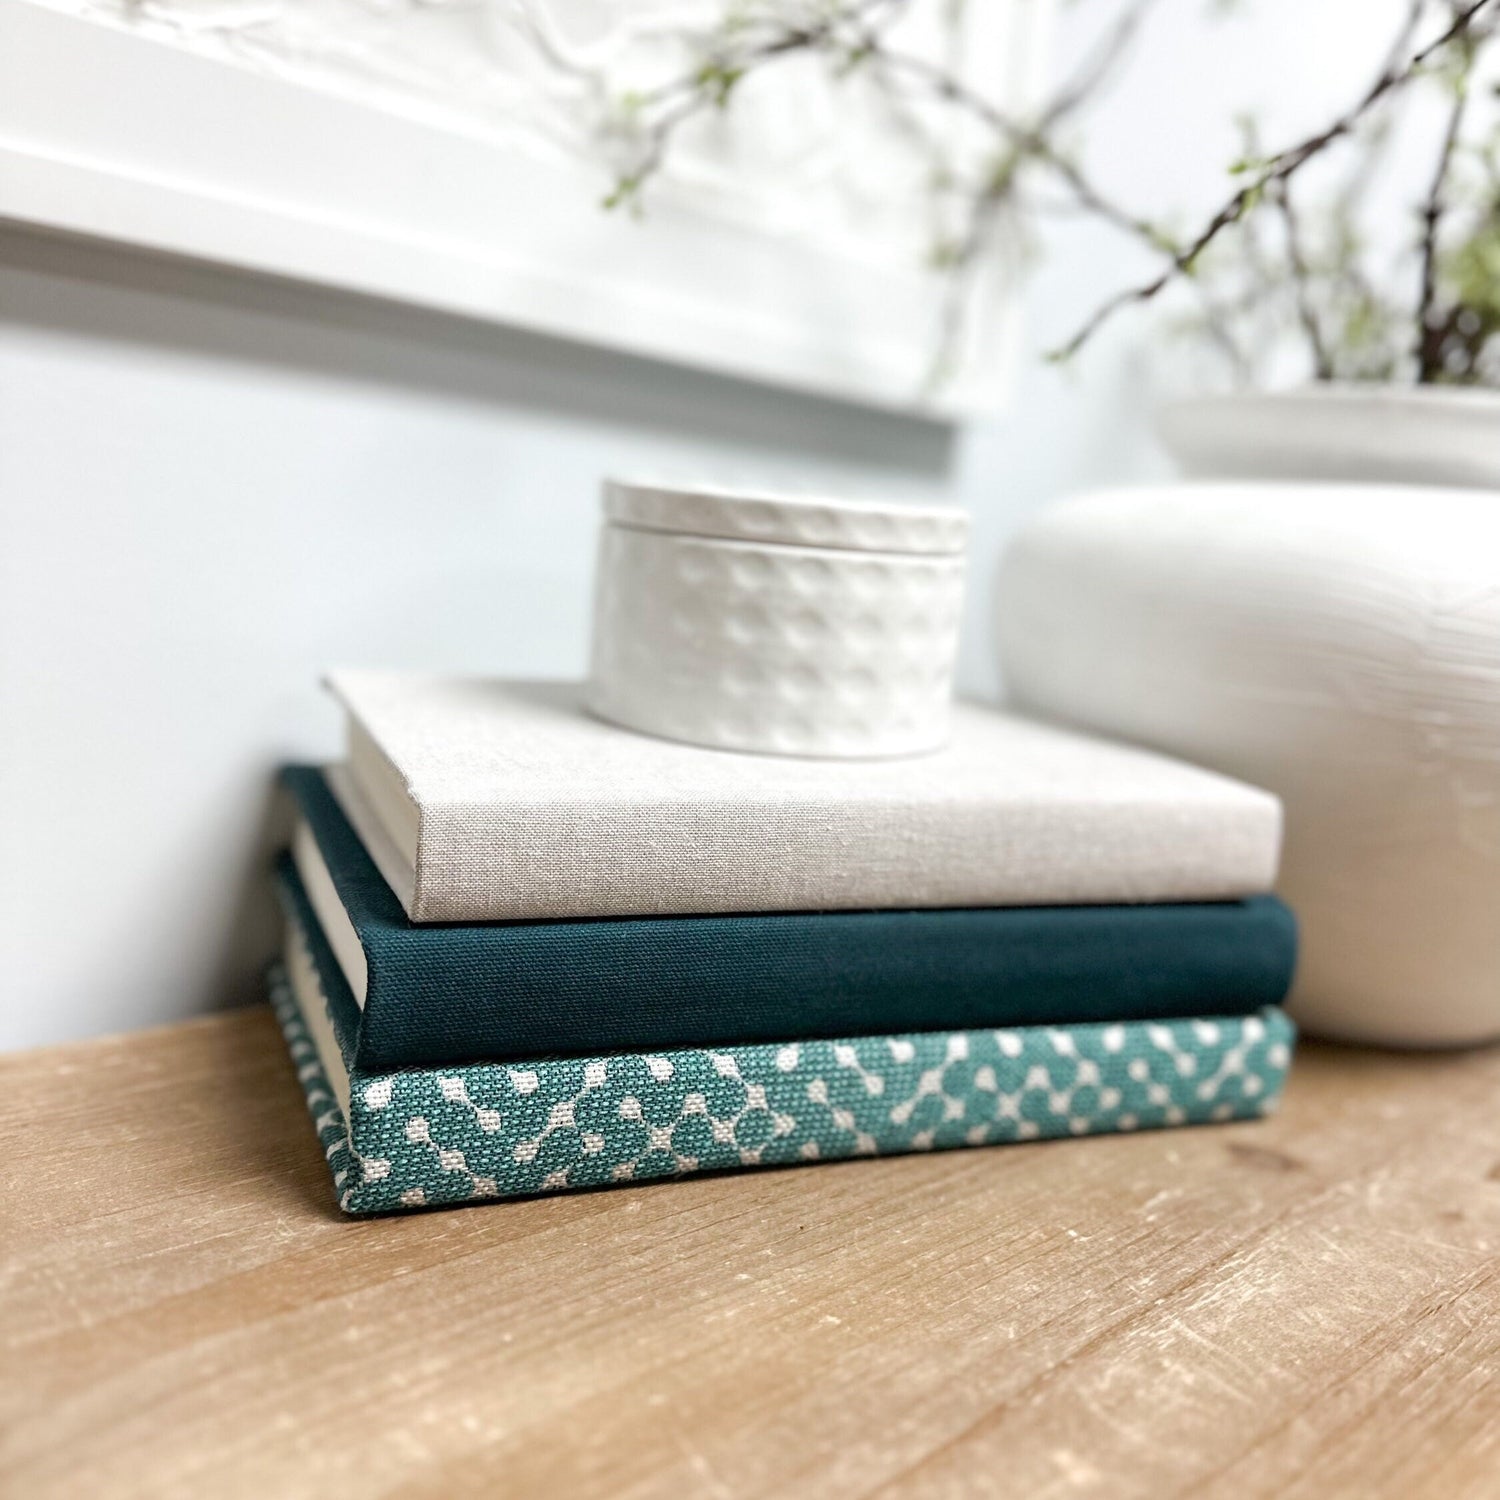 Turquoise Books for Home Decor, Linen Covered Books, Living Room Decor, Coffee Table Decor